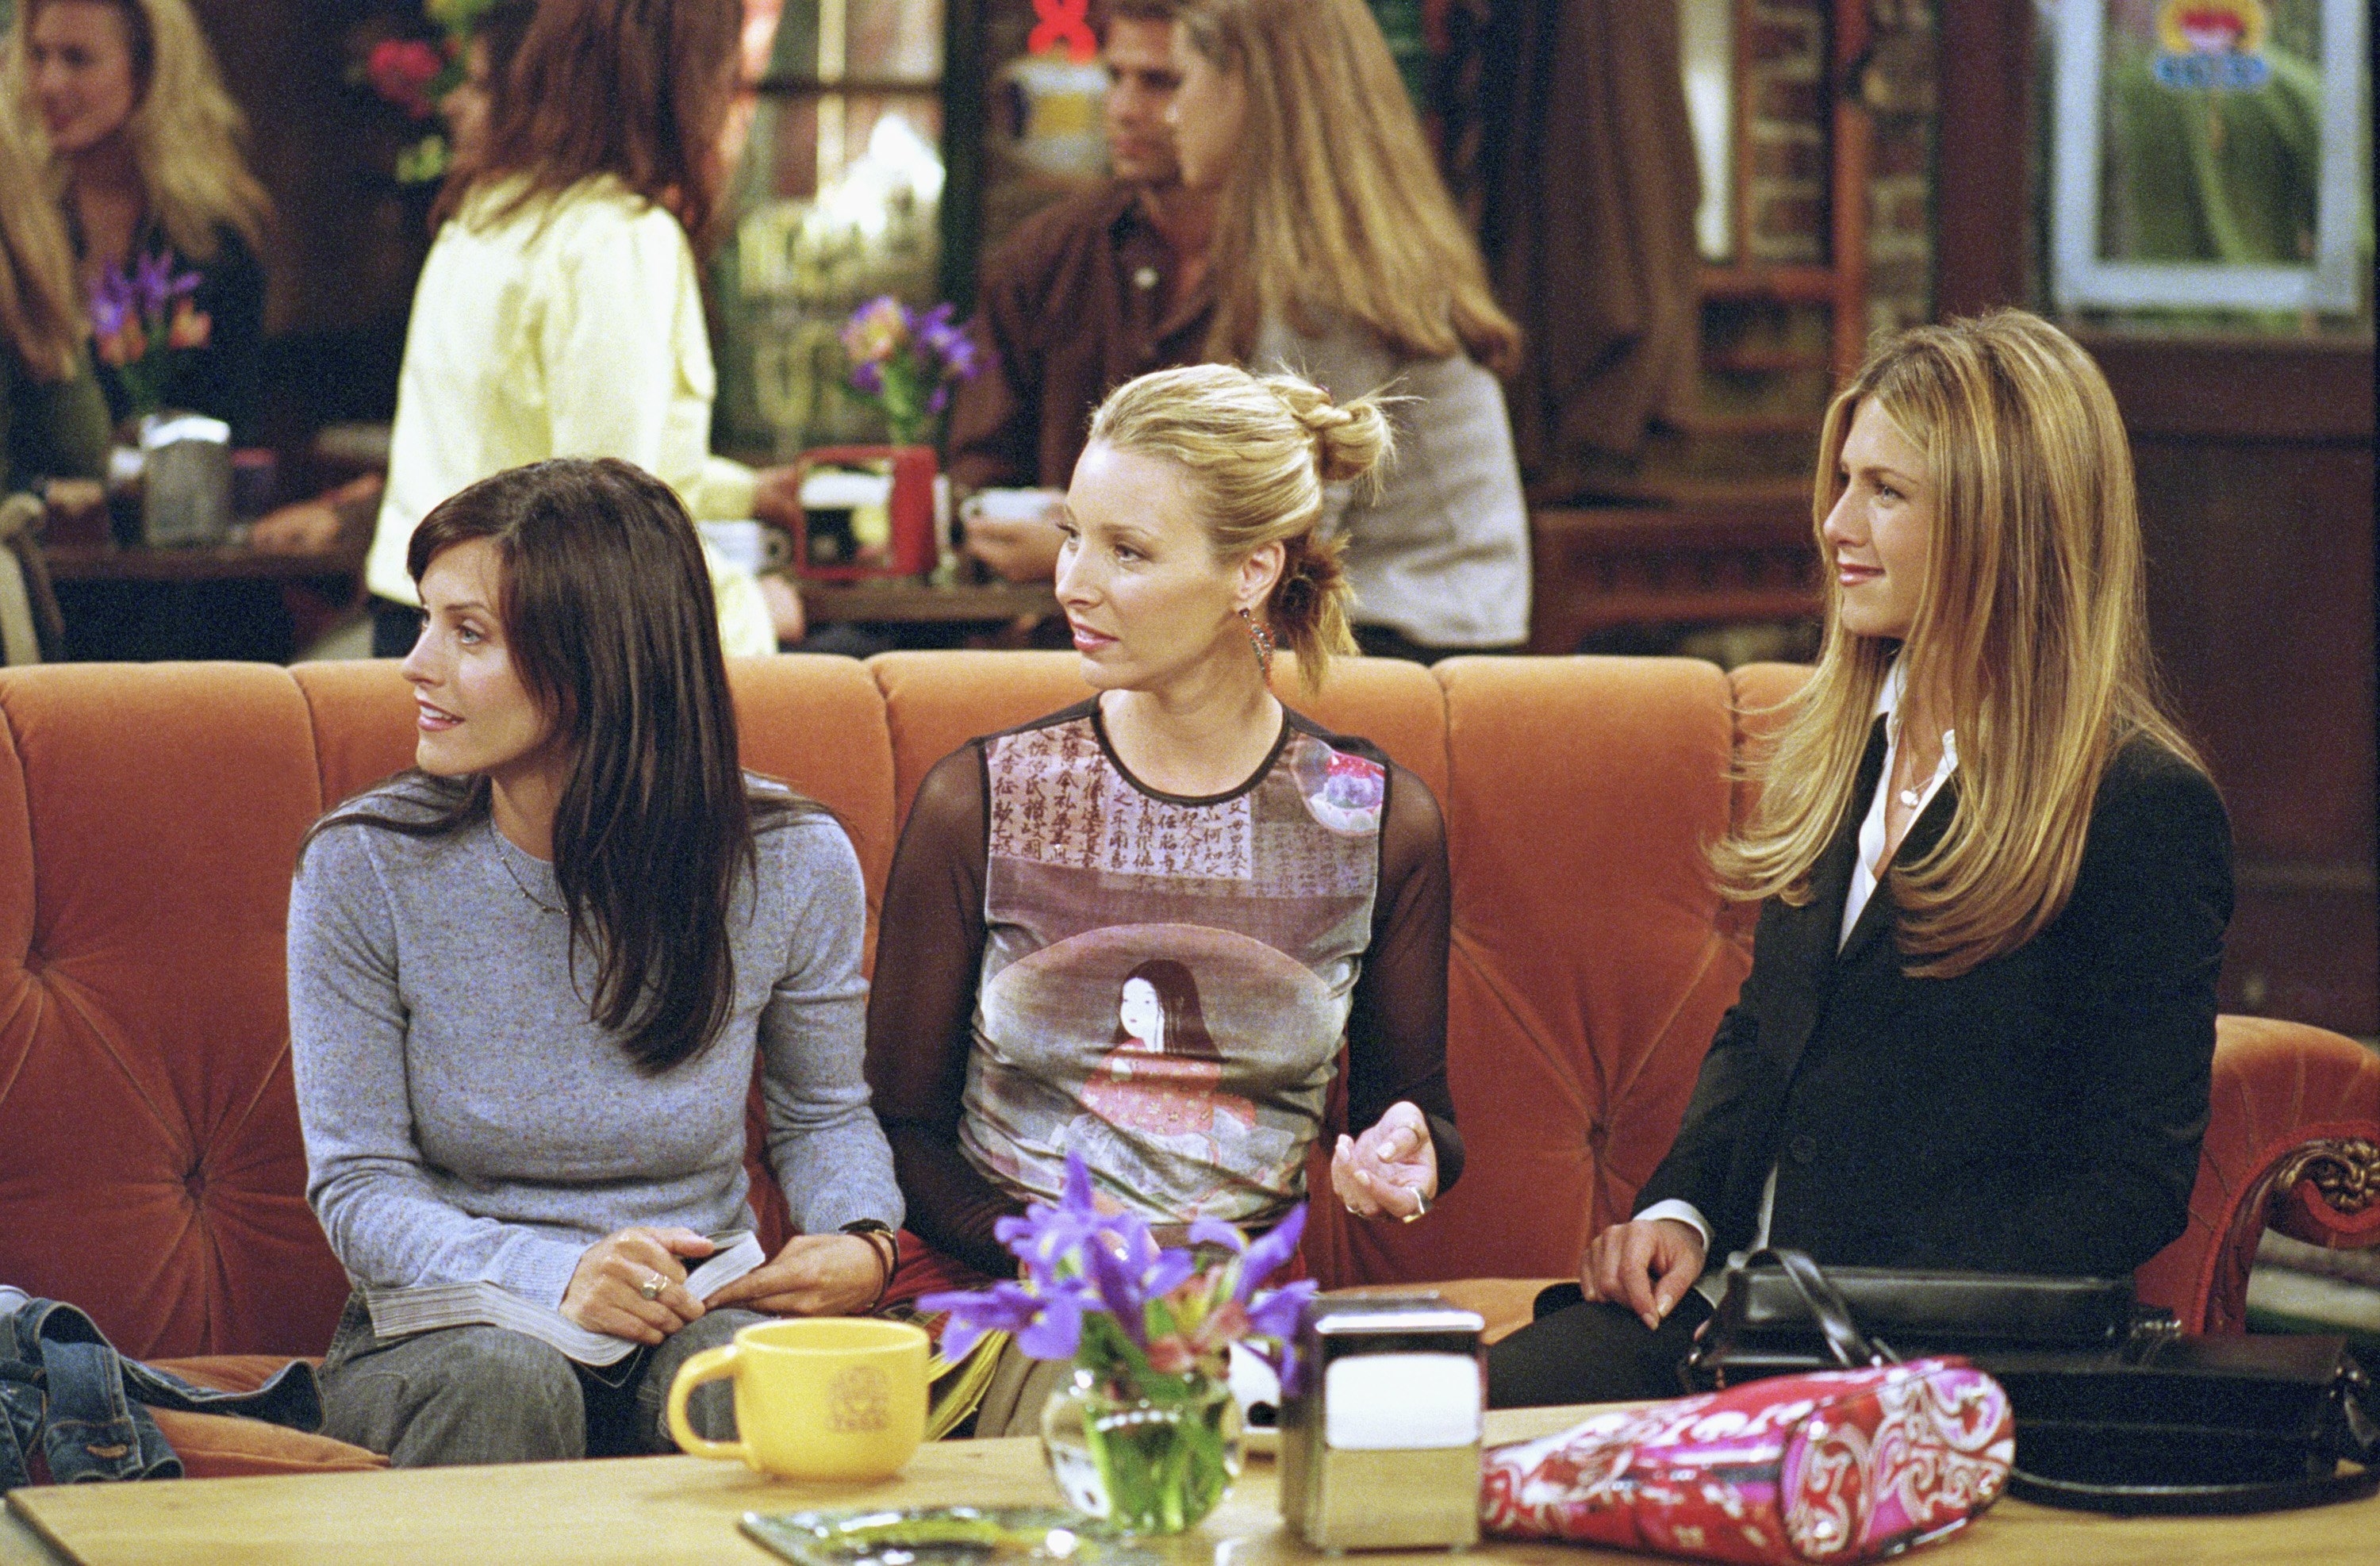 Courteney, Lisa, and Jennifer sitting on a couch